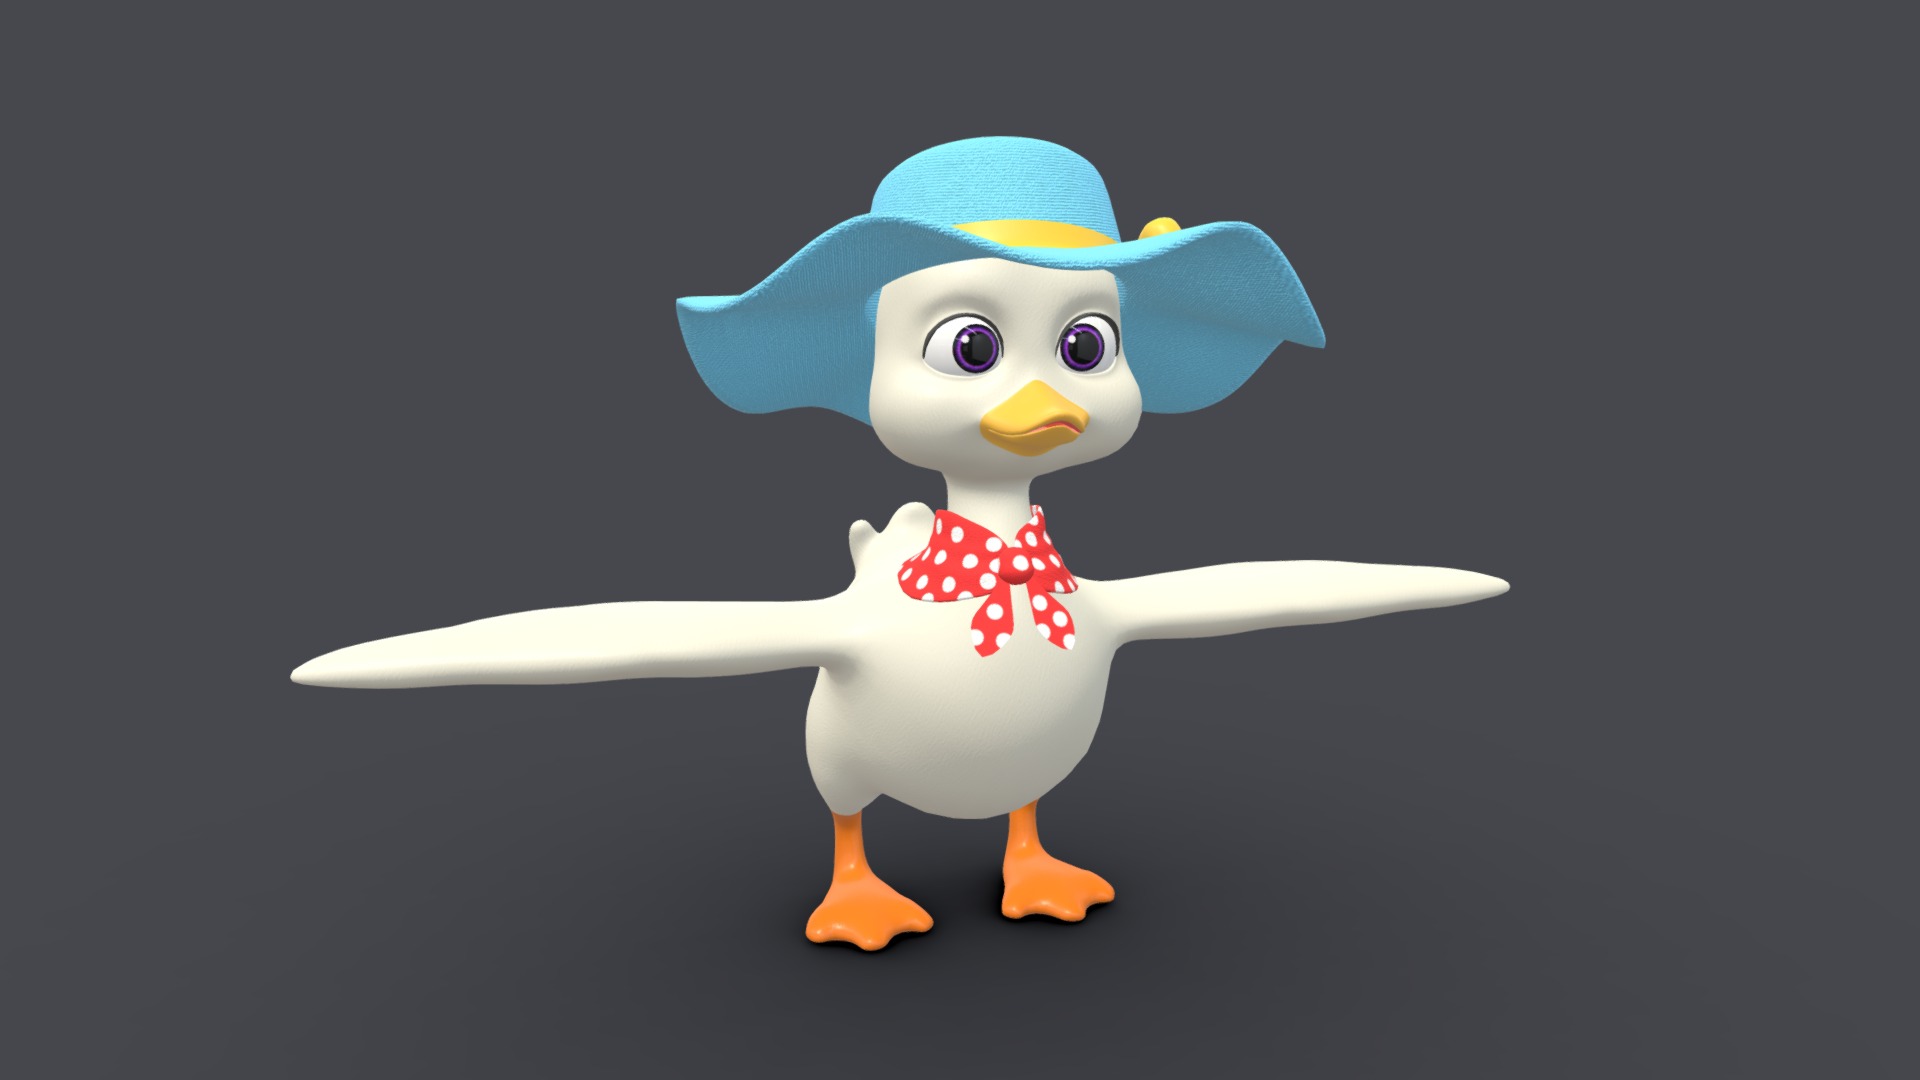 3D model Asset – Cartoons – Animals – Duck – Rig - This is a 3D model of the Asset - Cartoons - Animals - Duck - Rig. The 3D model is about a white and blue toy.